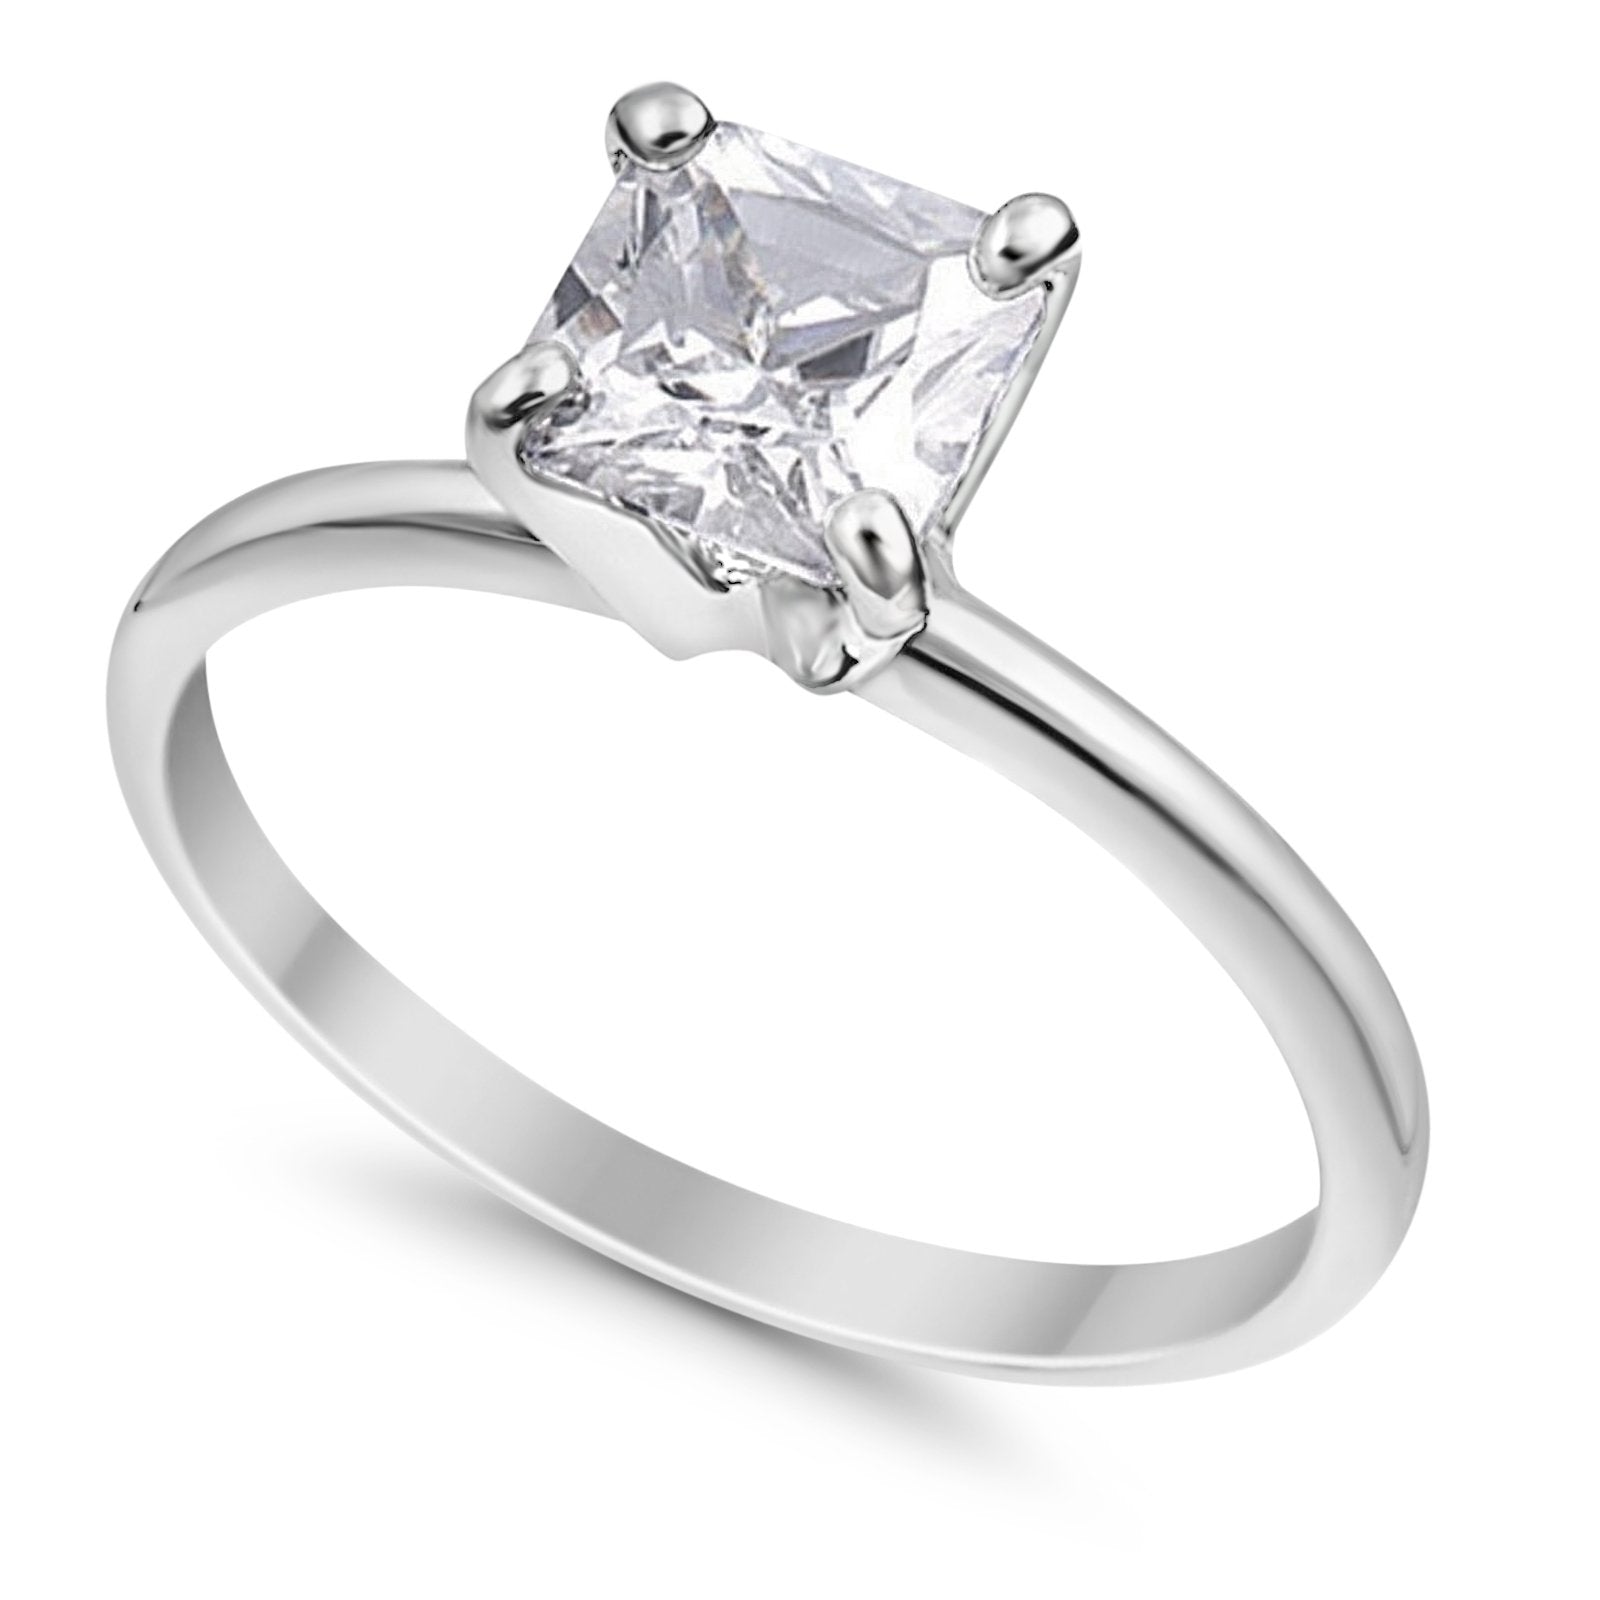 Solitaire Wedding Ring Princess Cut Simulated CZ 925 Sterling Silver